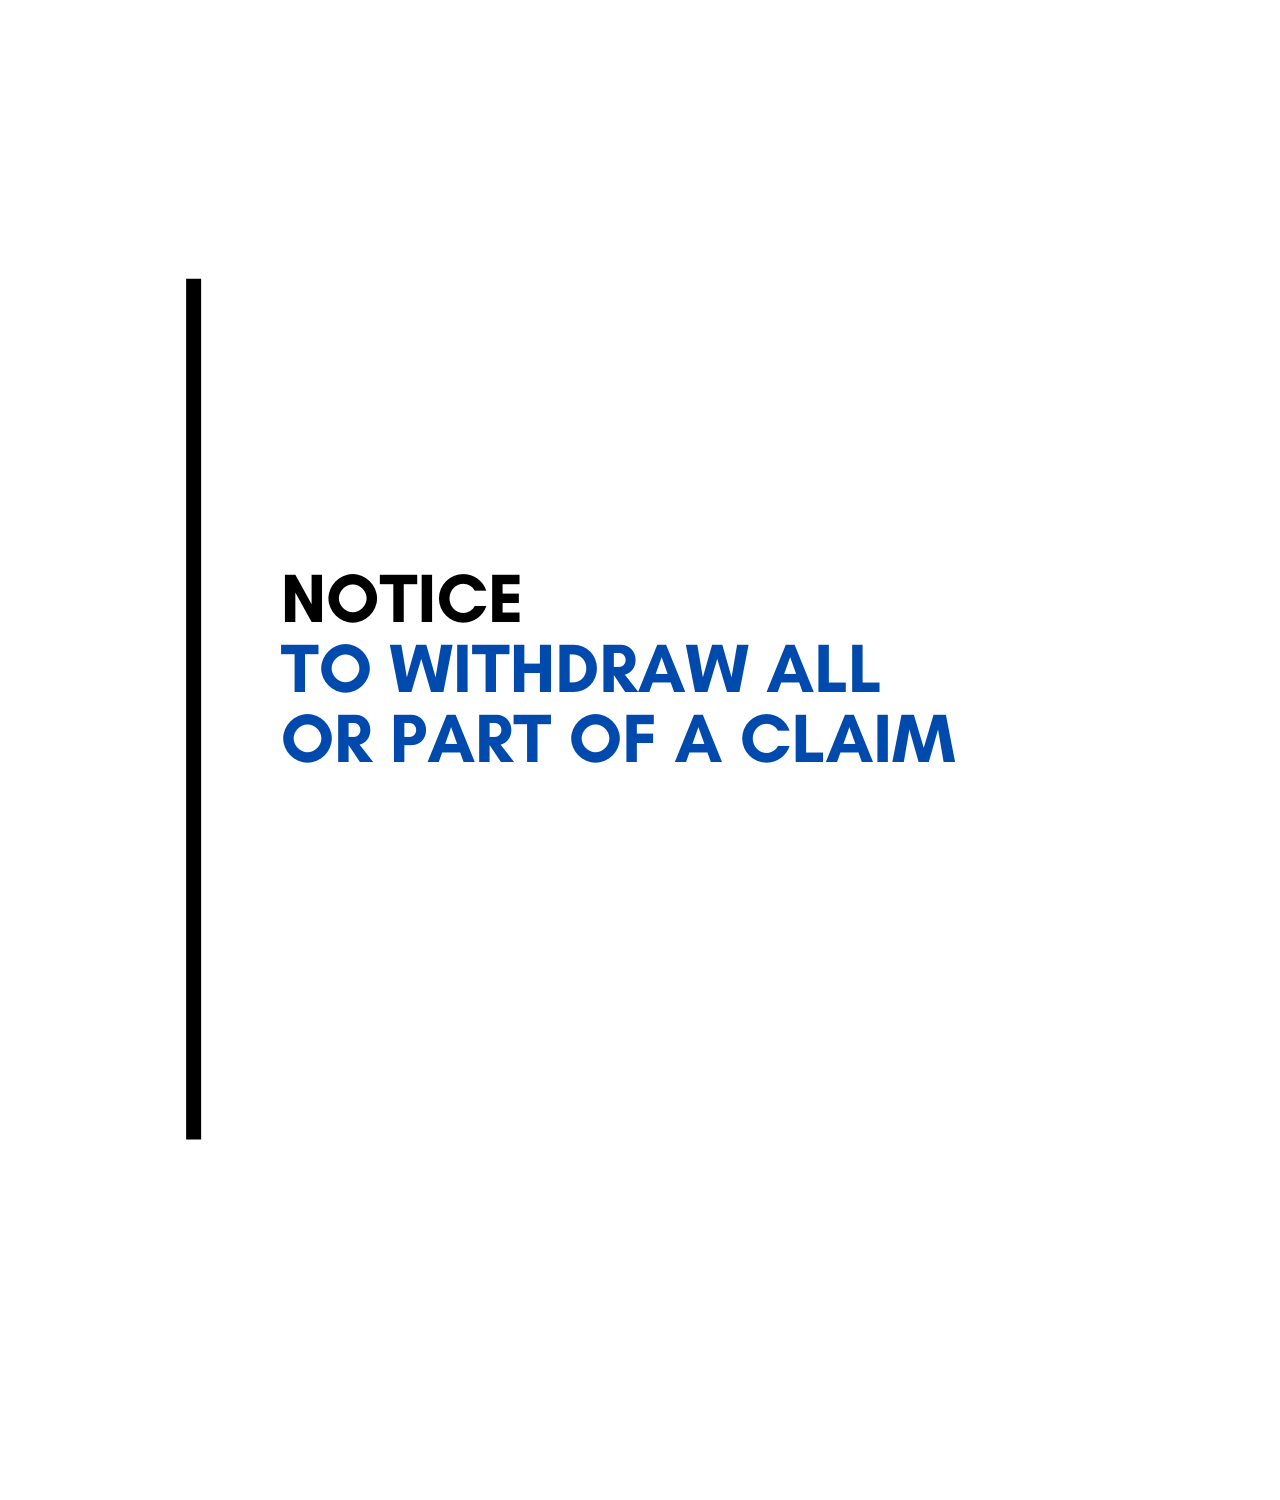 Notice to Withdraw All or Part of a Claim